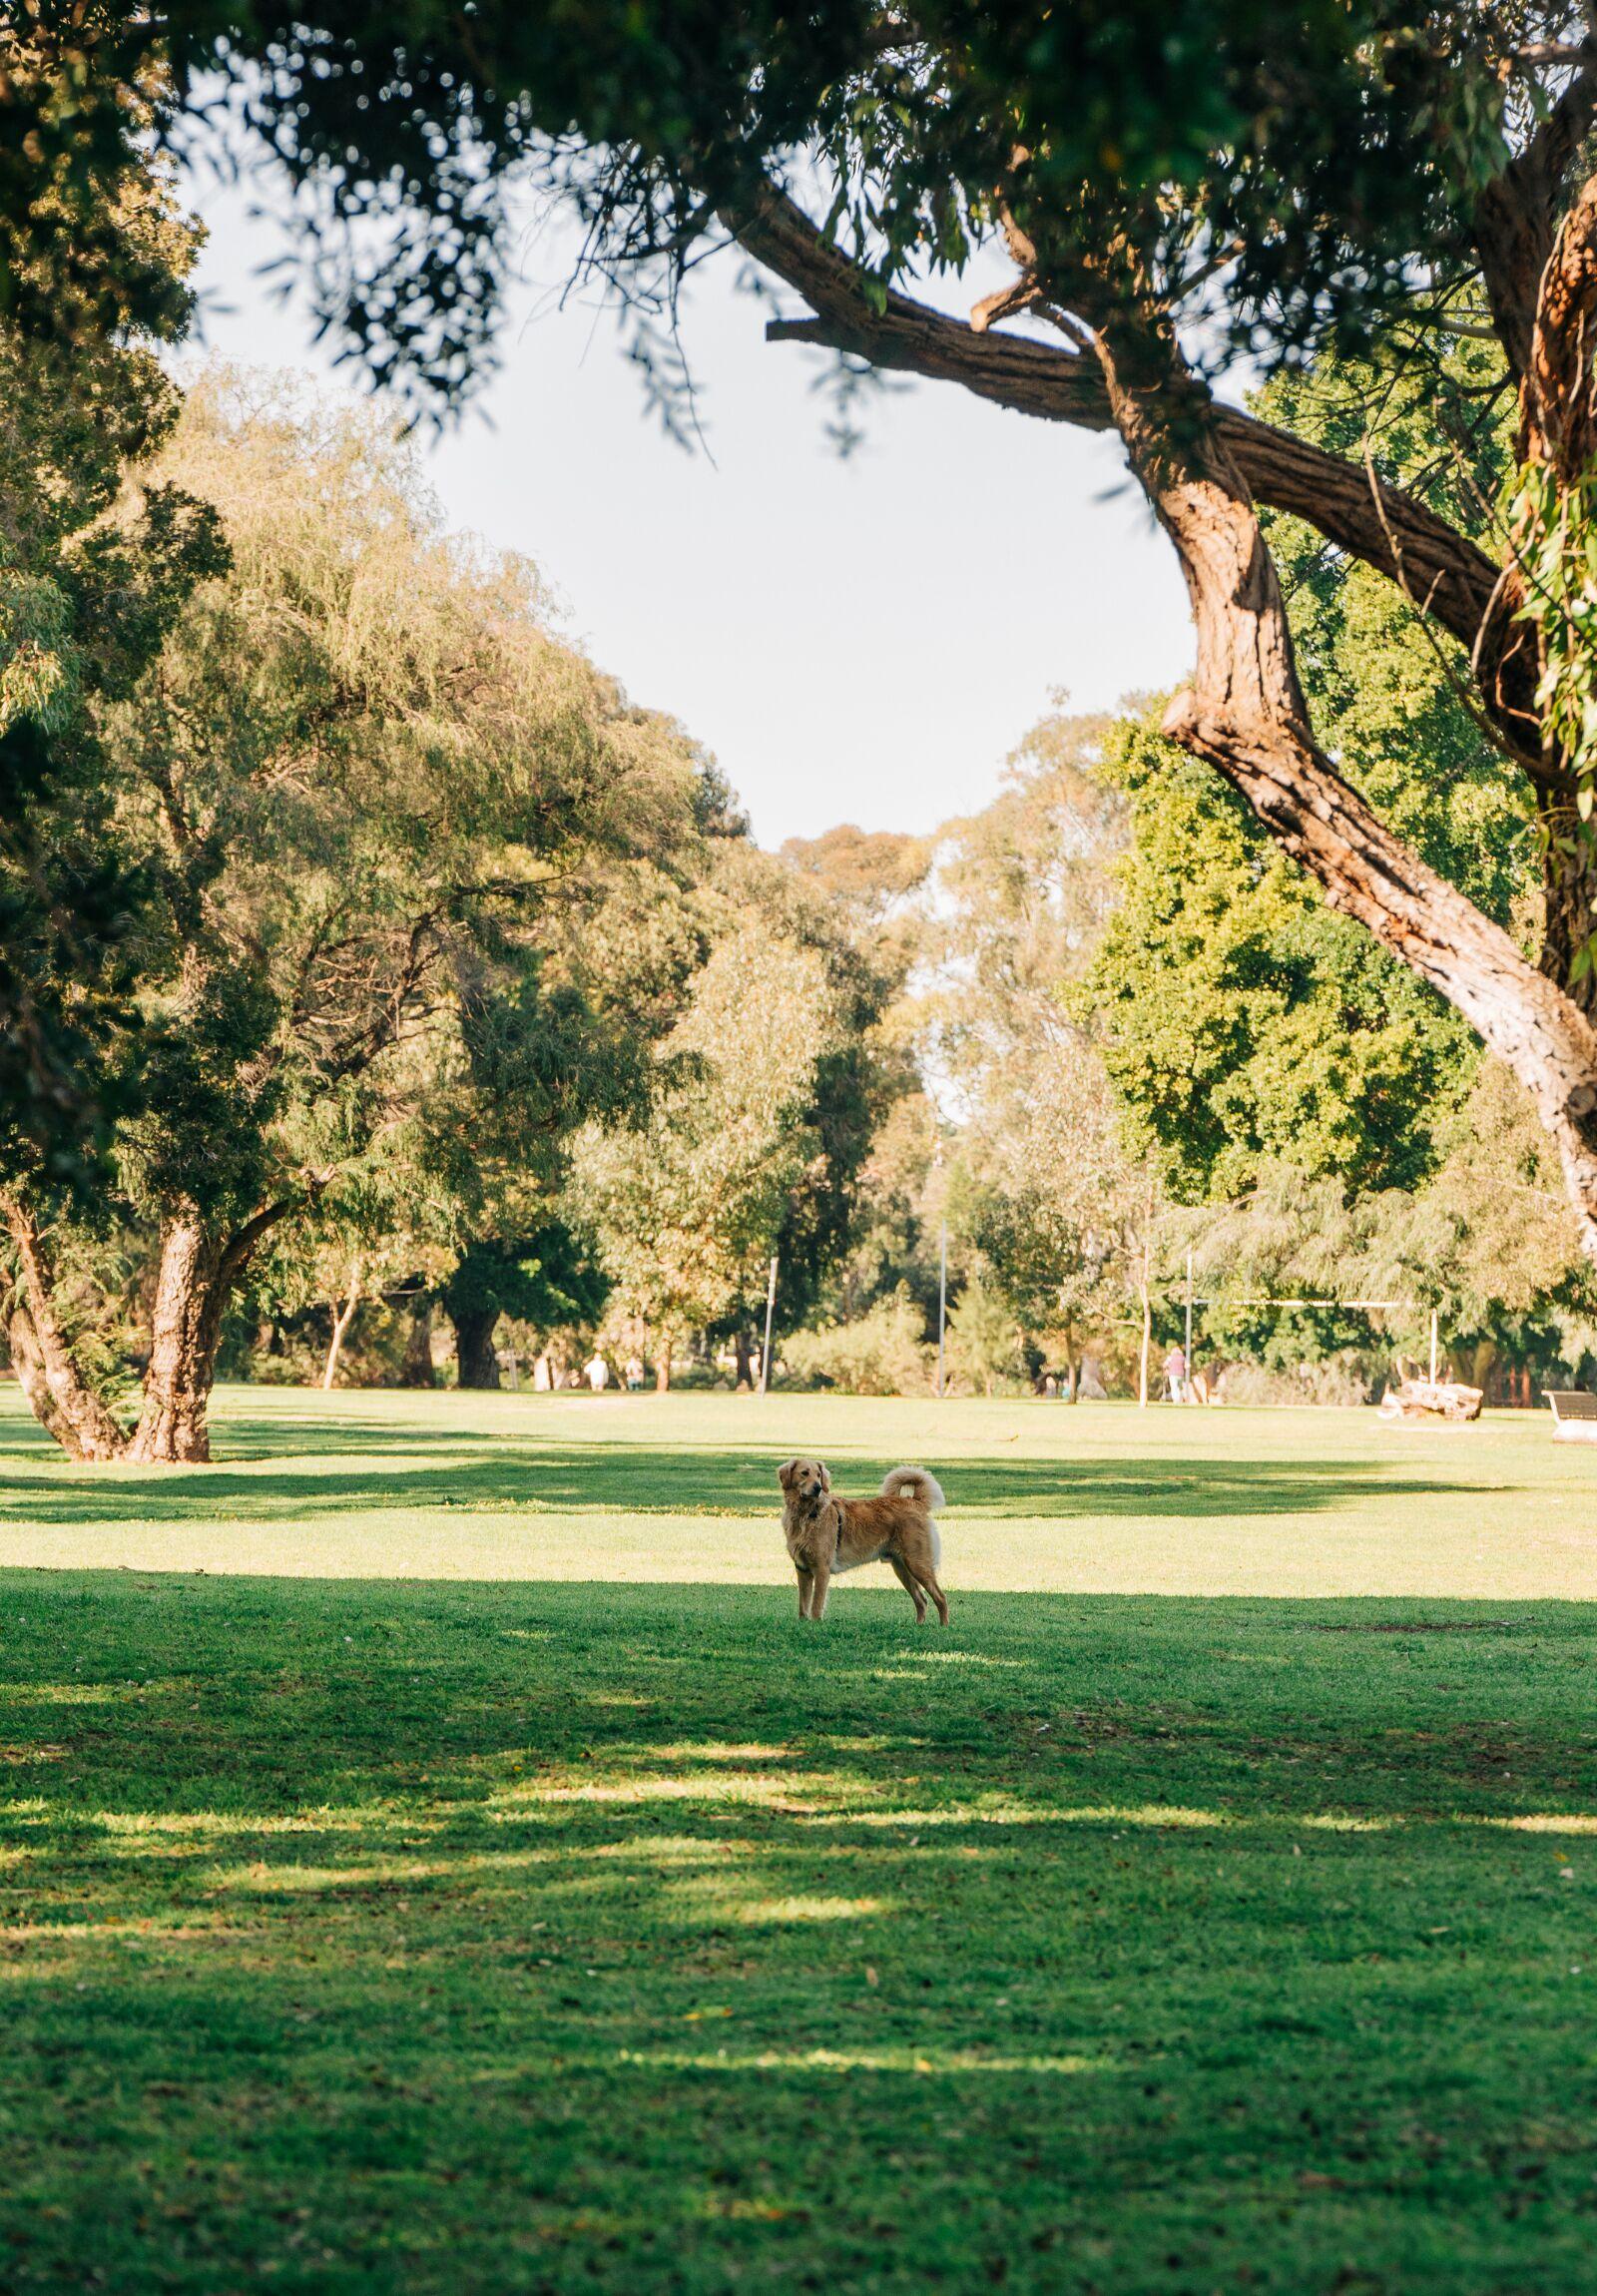 LAKE CLAREMONT IS THE PERFECT SPACE FOR YOUR FOUR-LEGGED FRIENDS TO STRETCH THEIR LEGS.